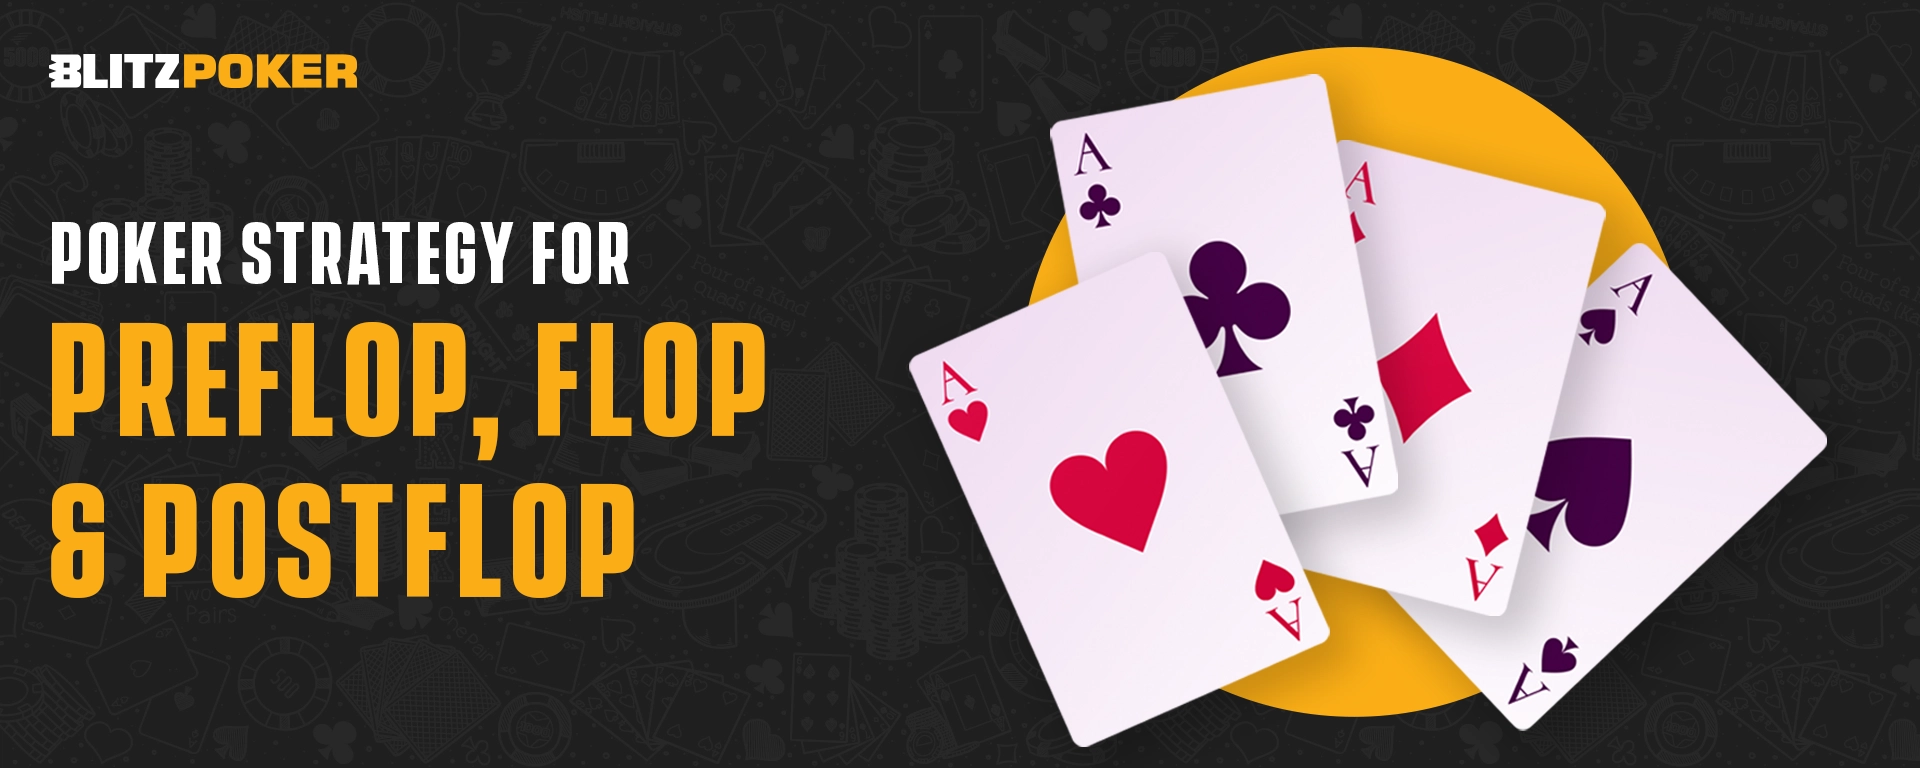 Poker Strategy For Preflop, Flop and Postflop